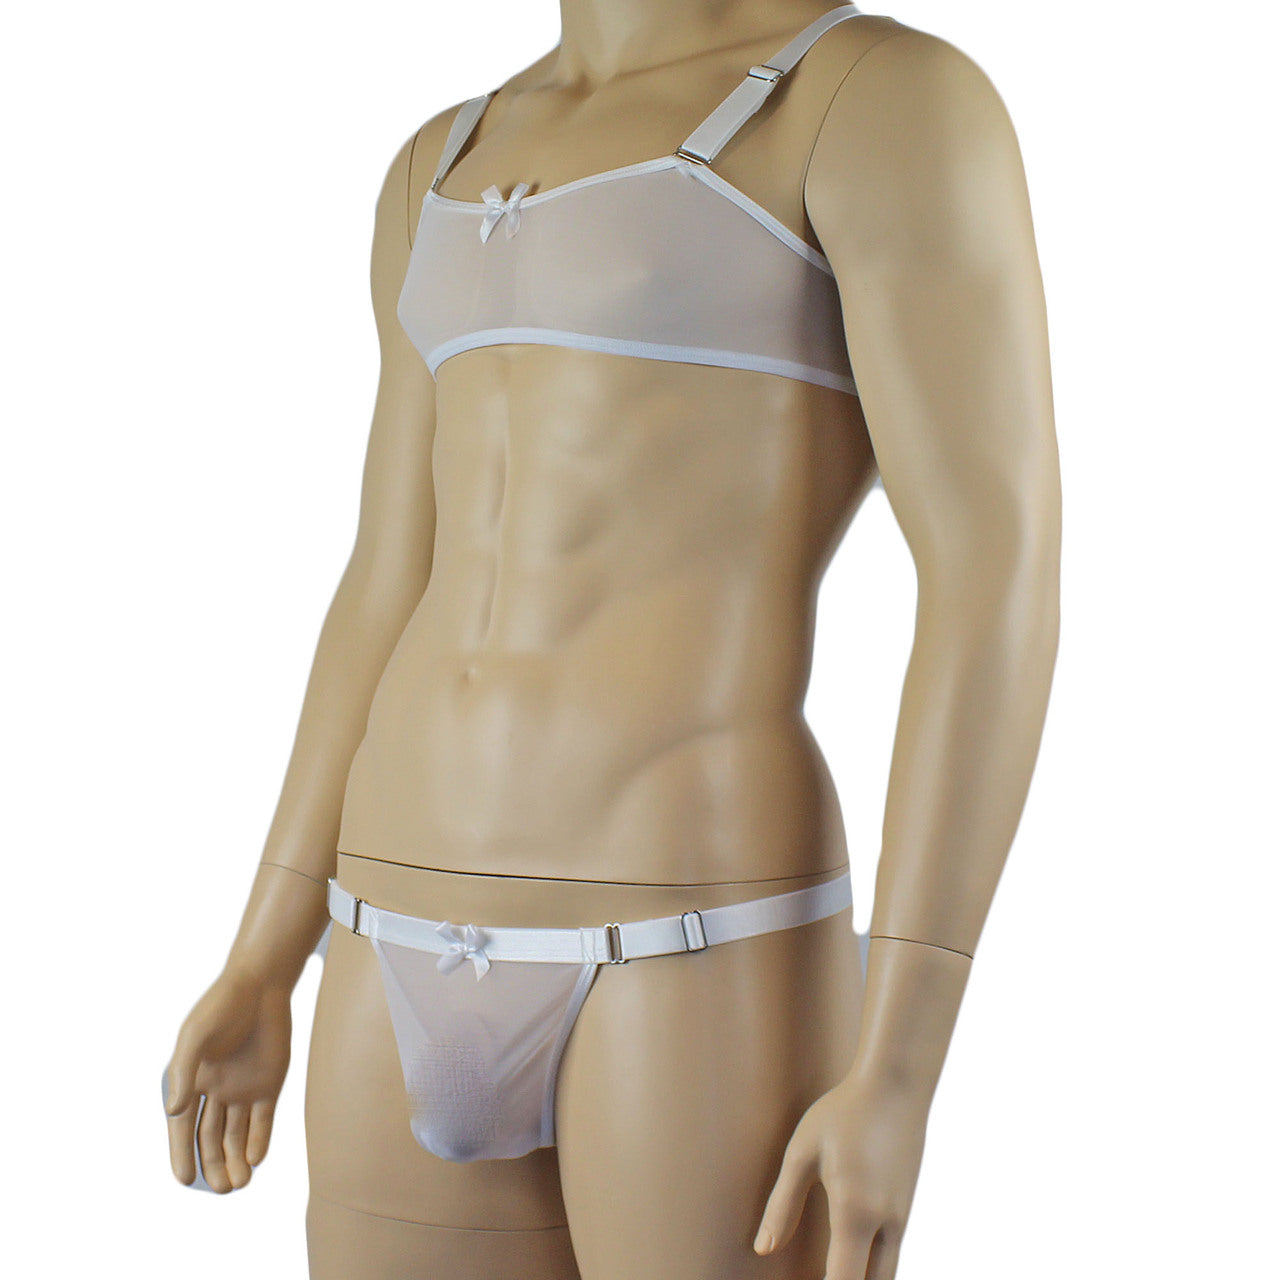 Mens Exotic Sheer Mesh Bra Top & G string (white plus other colours)